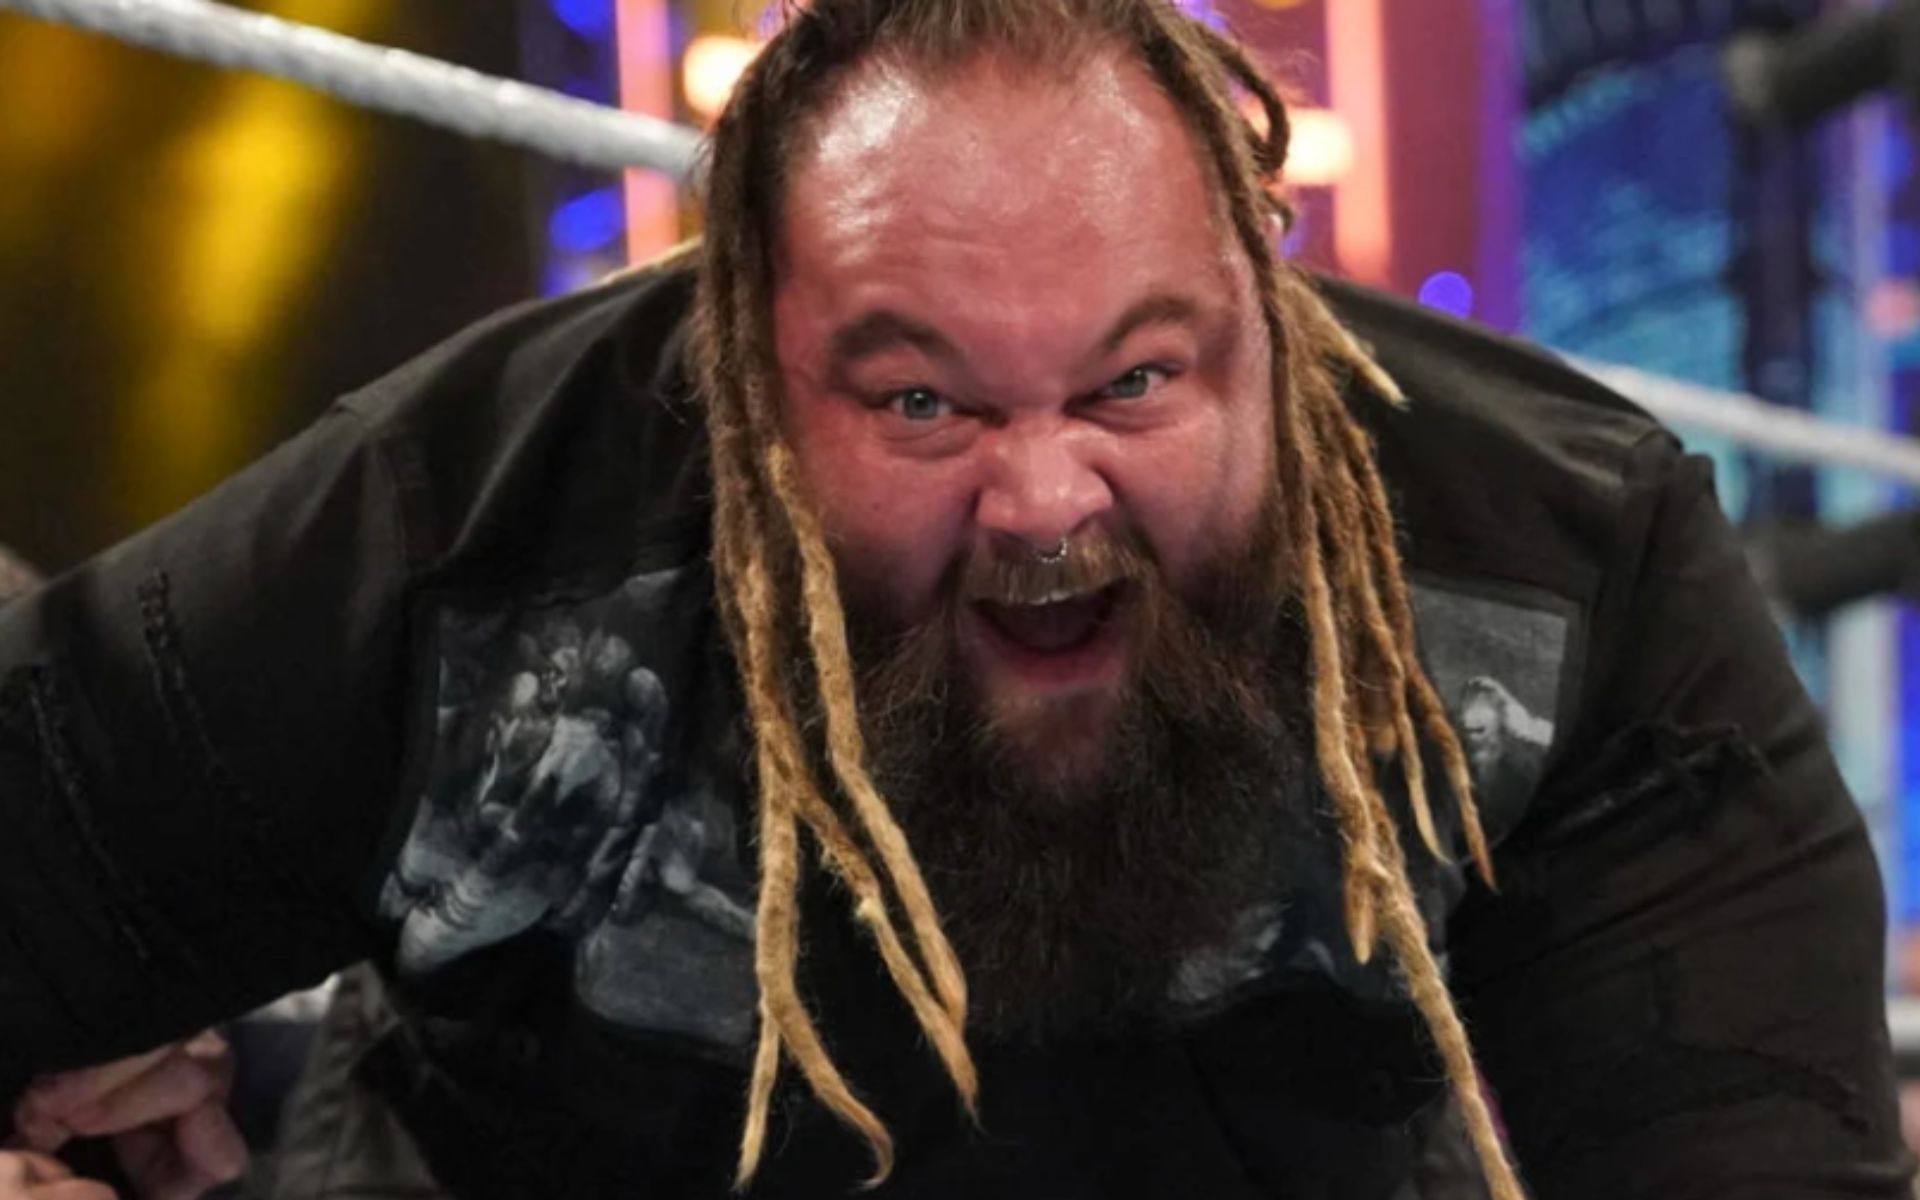 Bray Wyatt has competed in quite a few creatively themed matches at WrestleMania